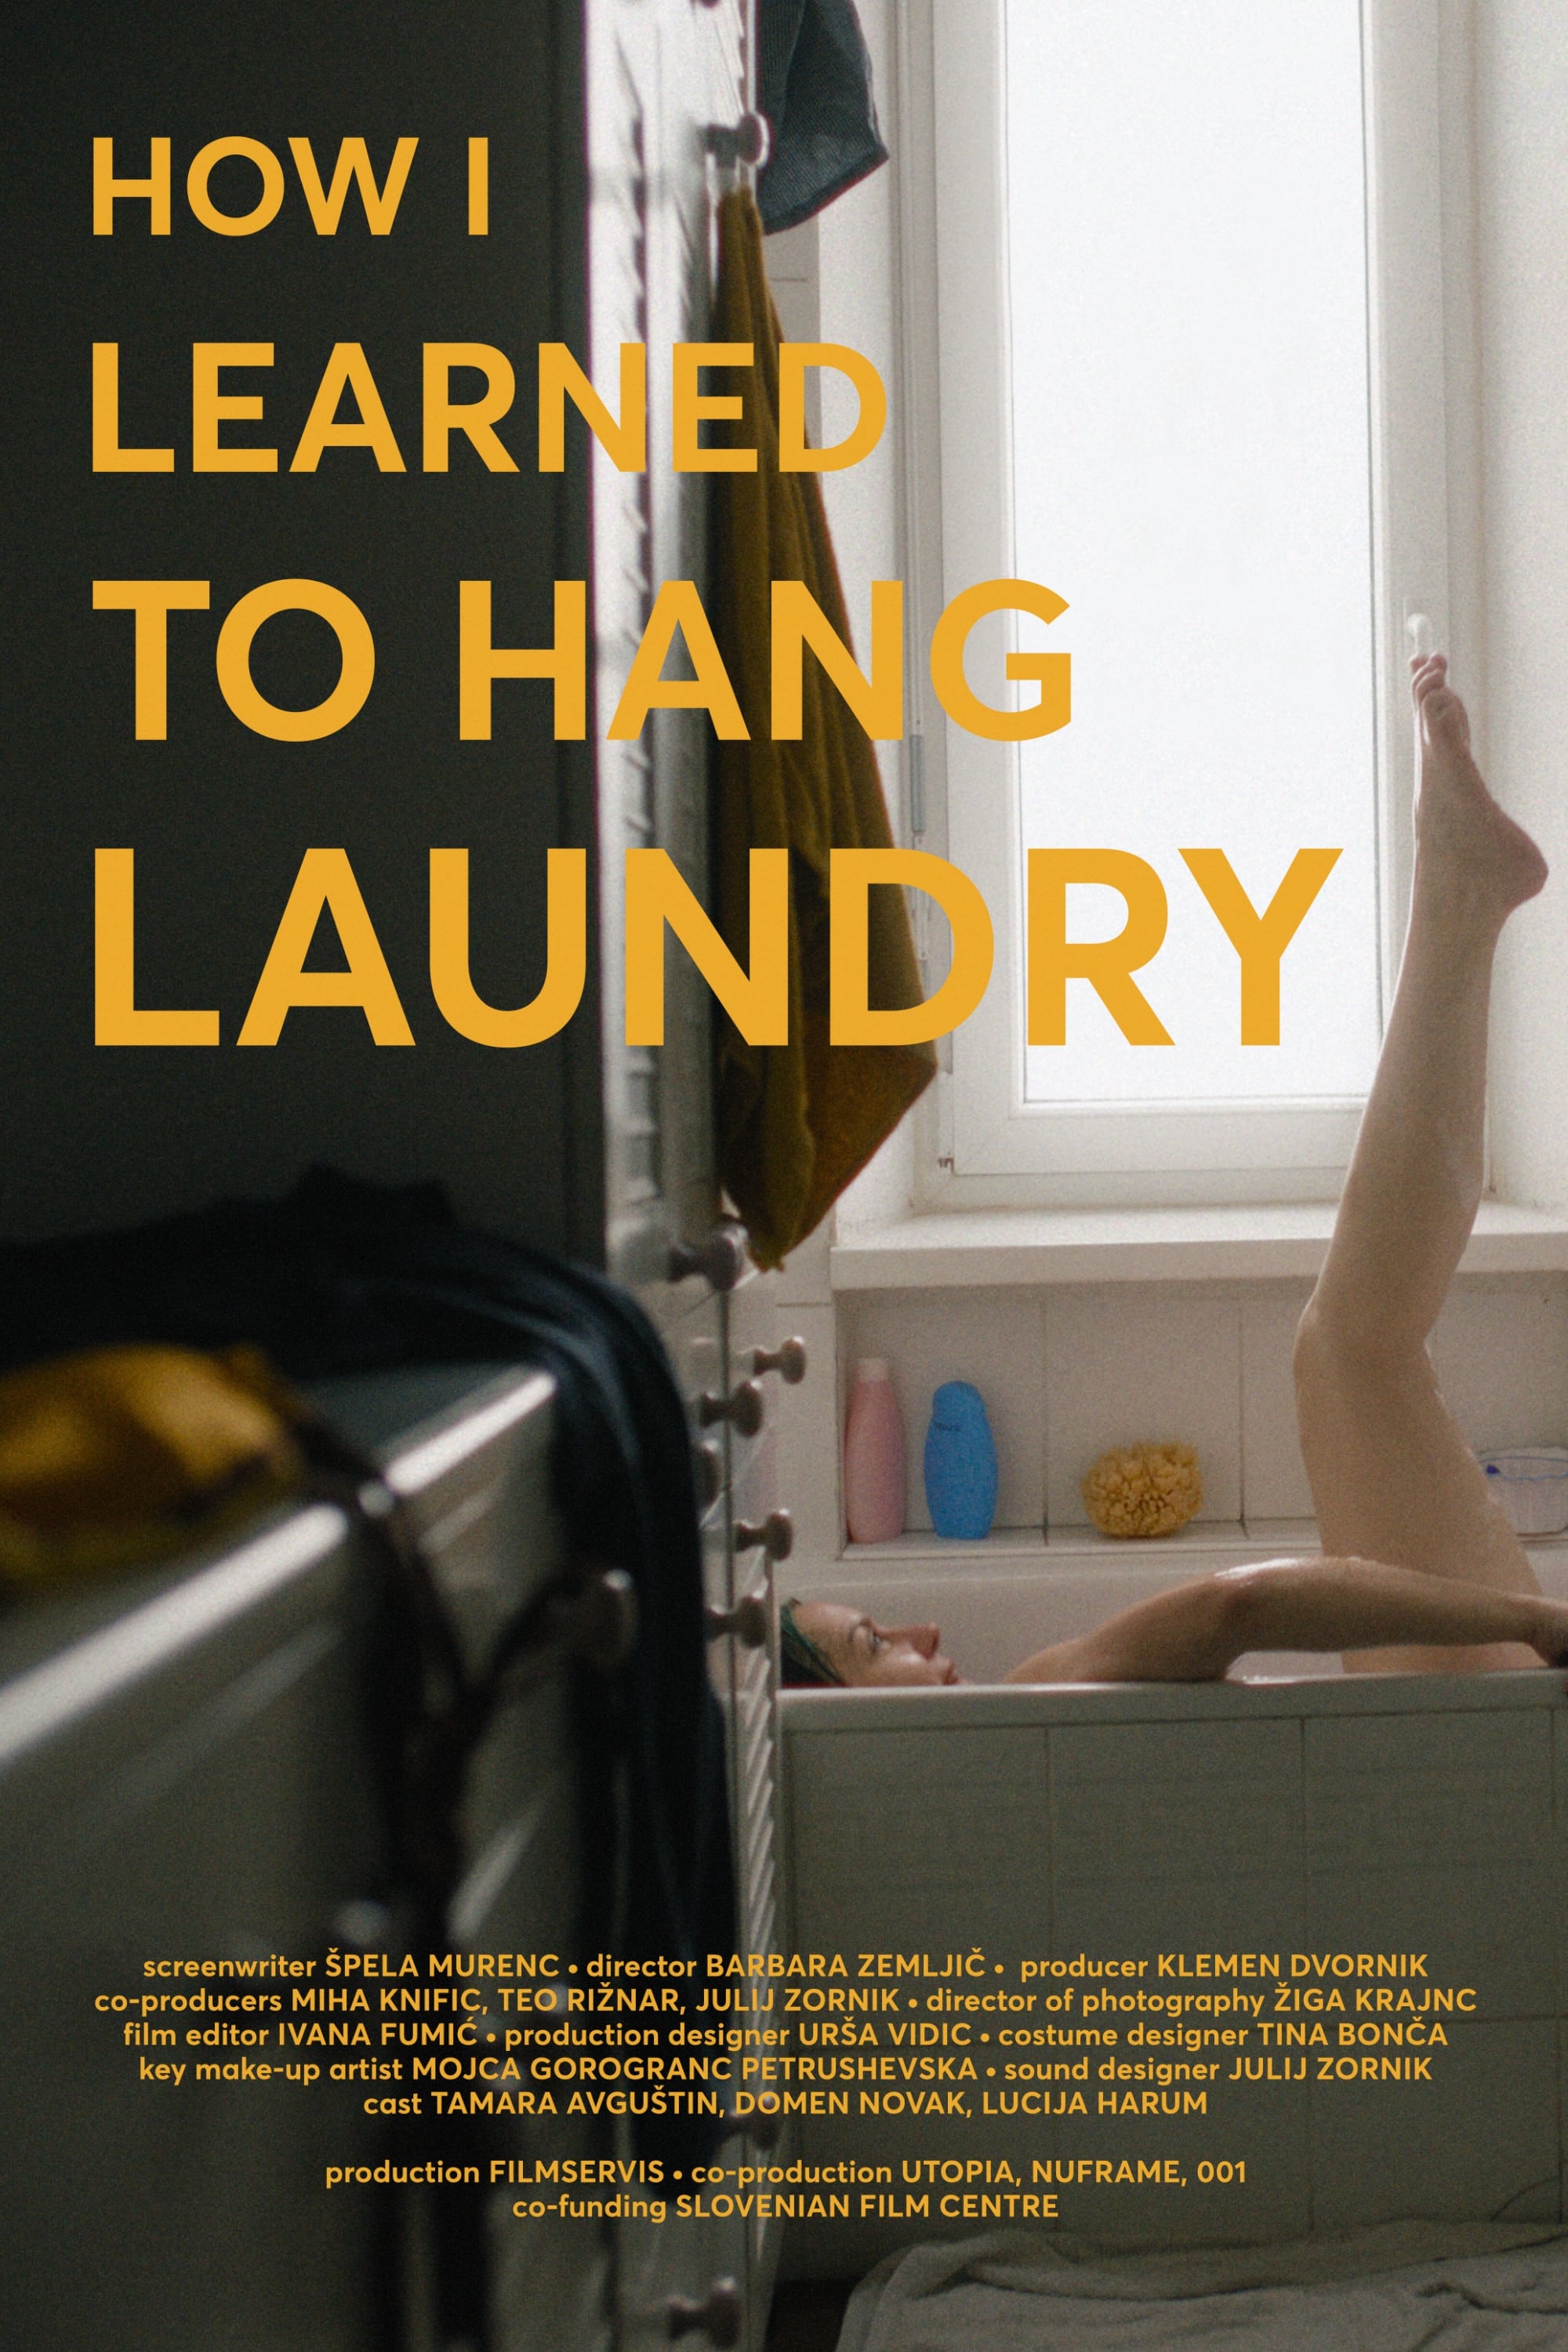 How I Learned to Hang Laundry